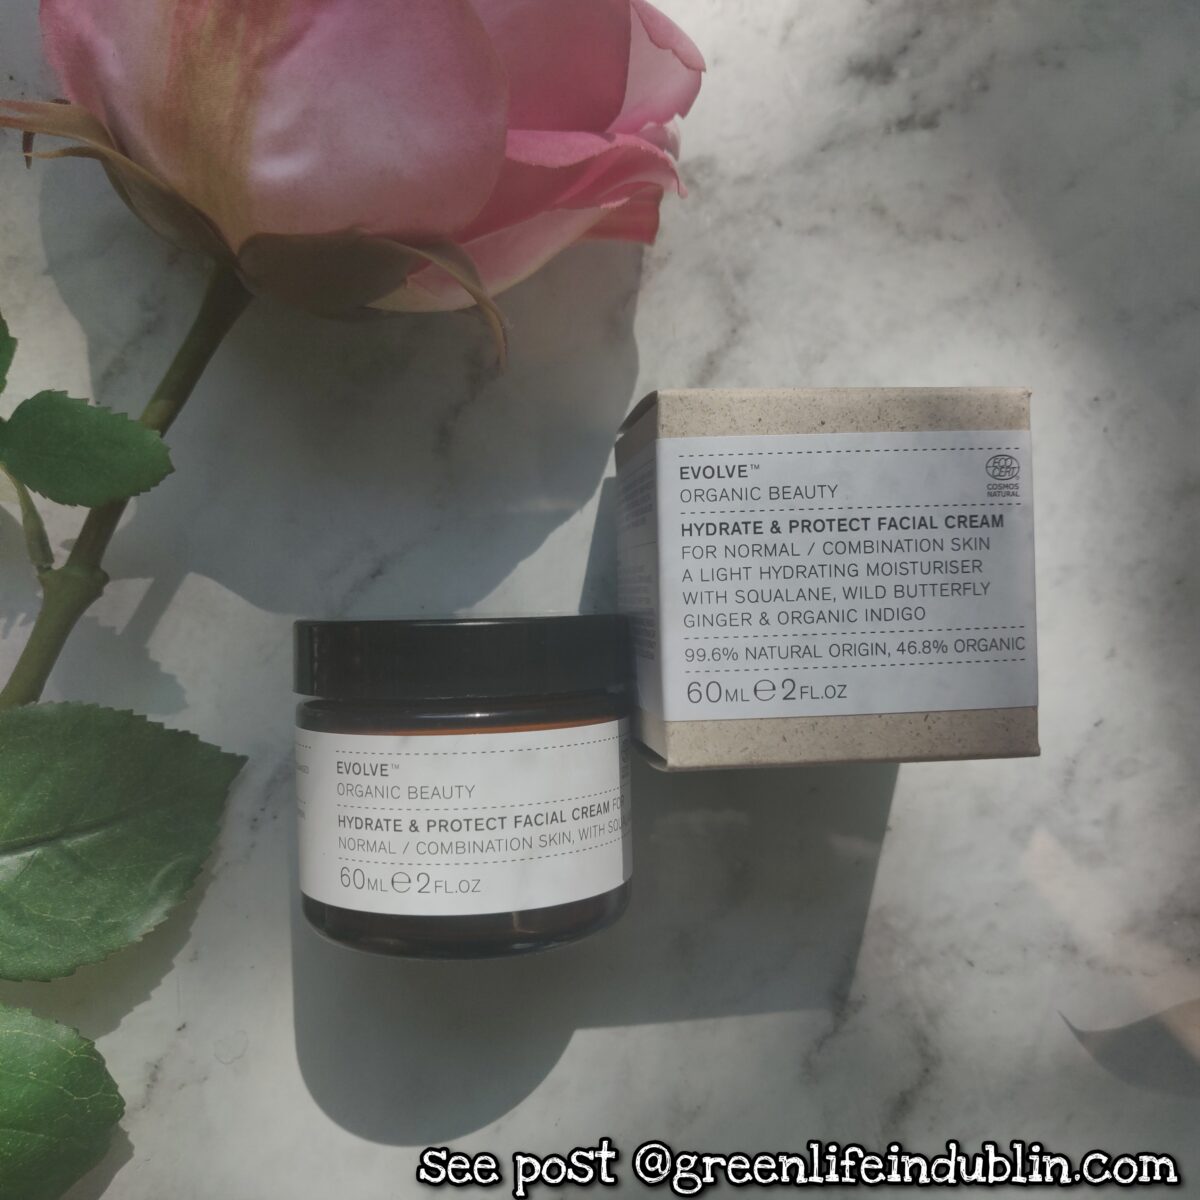 Evolve Organic Beauty Hydrate & Protect Facial Cream First Impressions Review – Green Life In Dublin